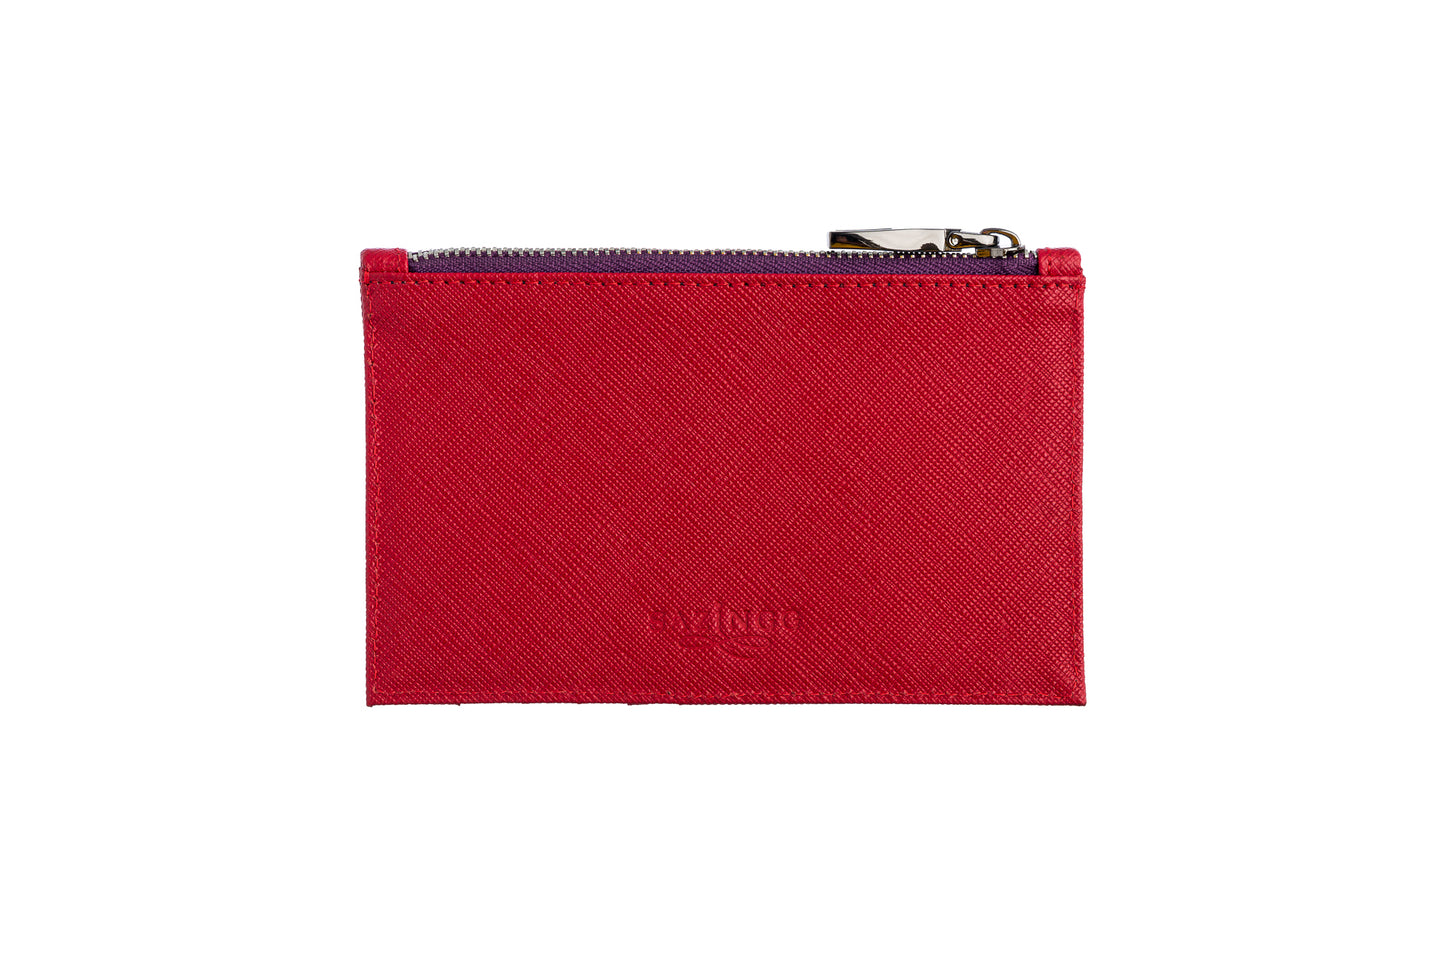 Credit Card Zip Pouch in Red Textured Leather